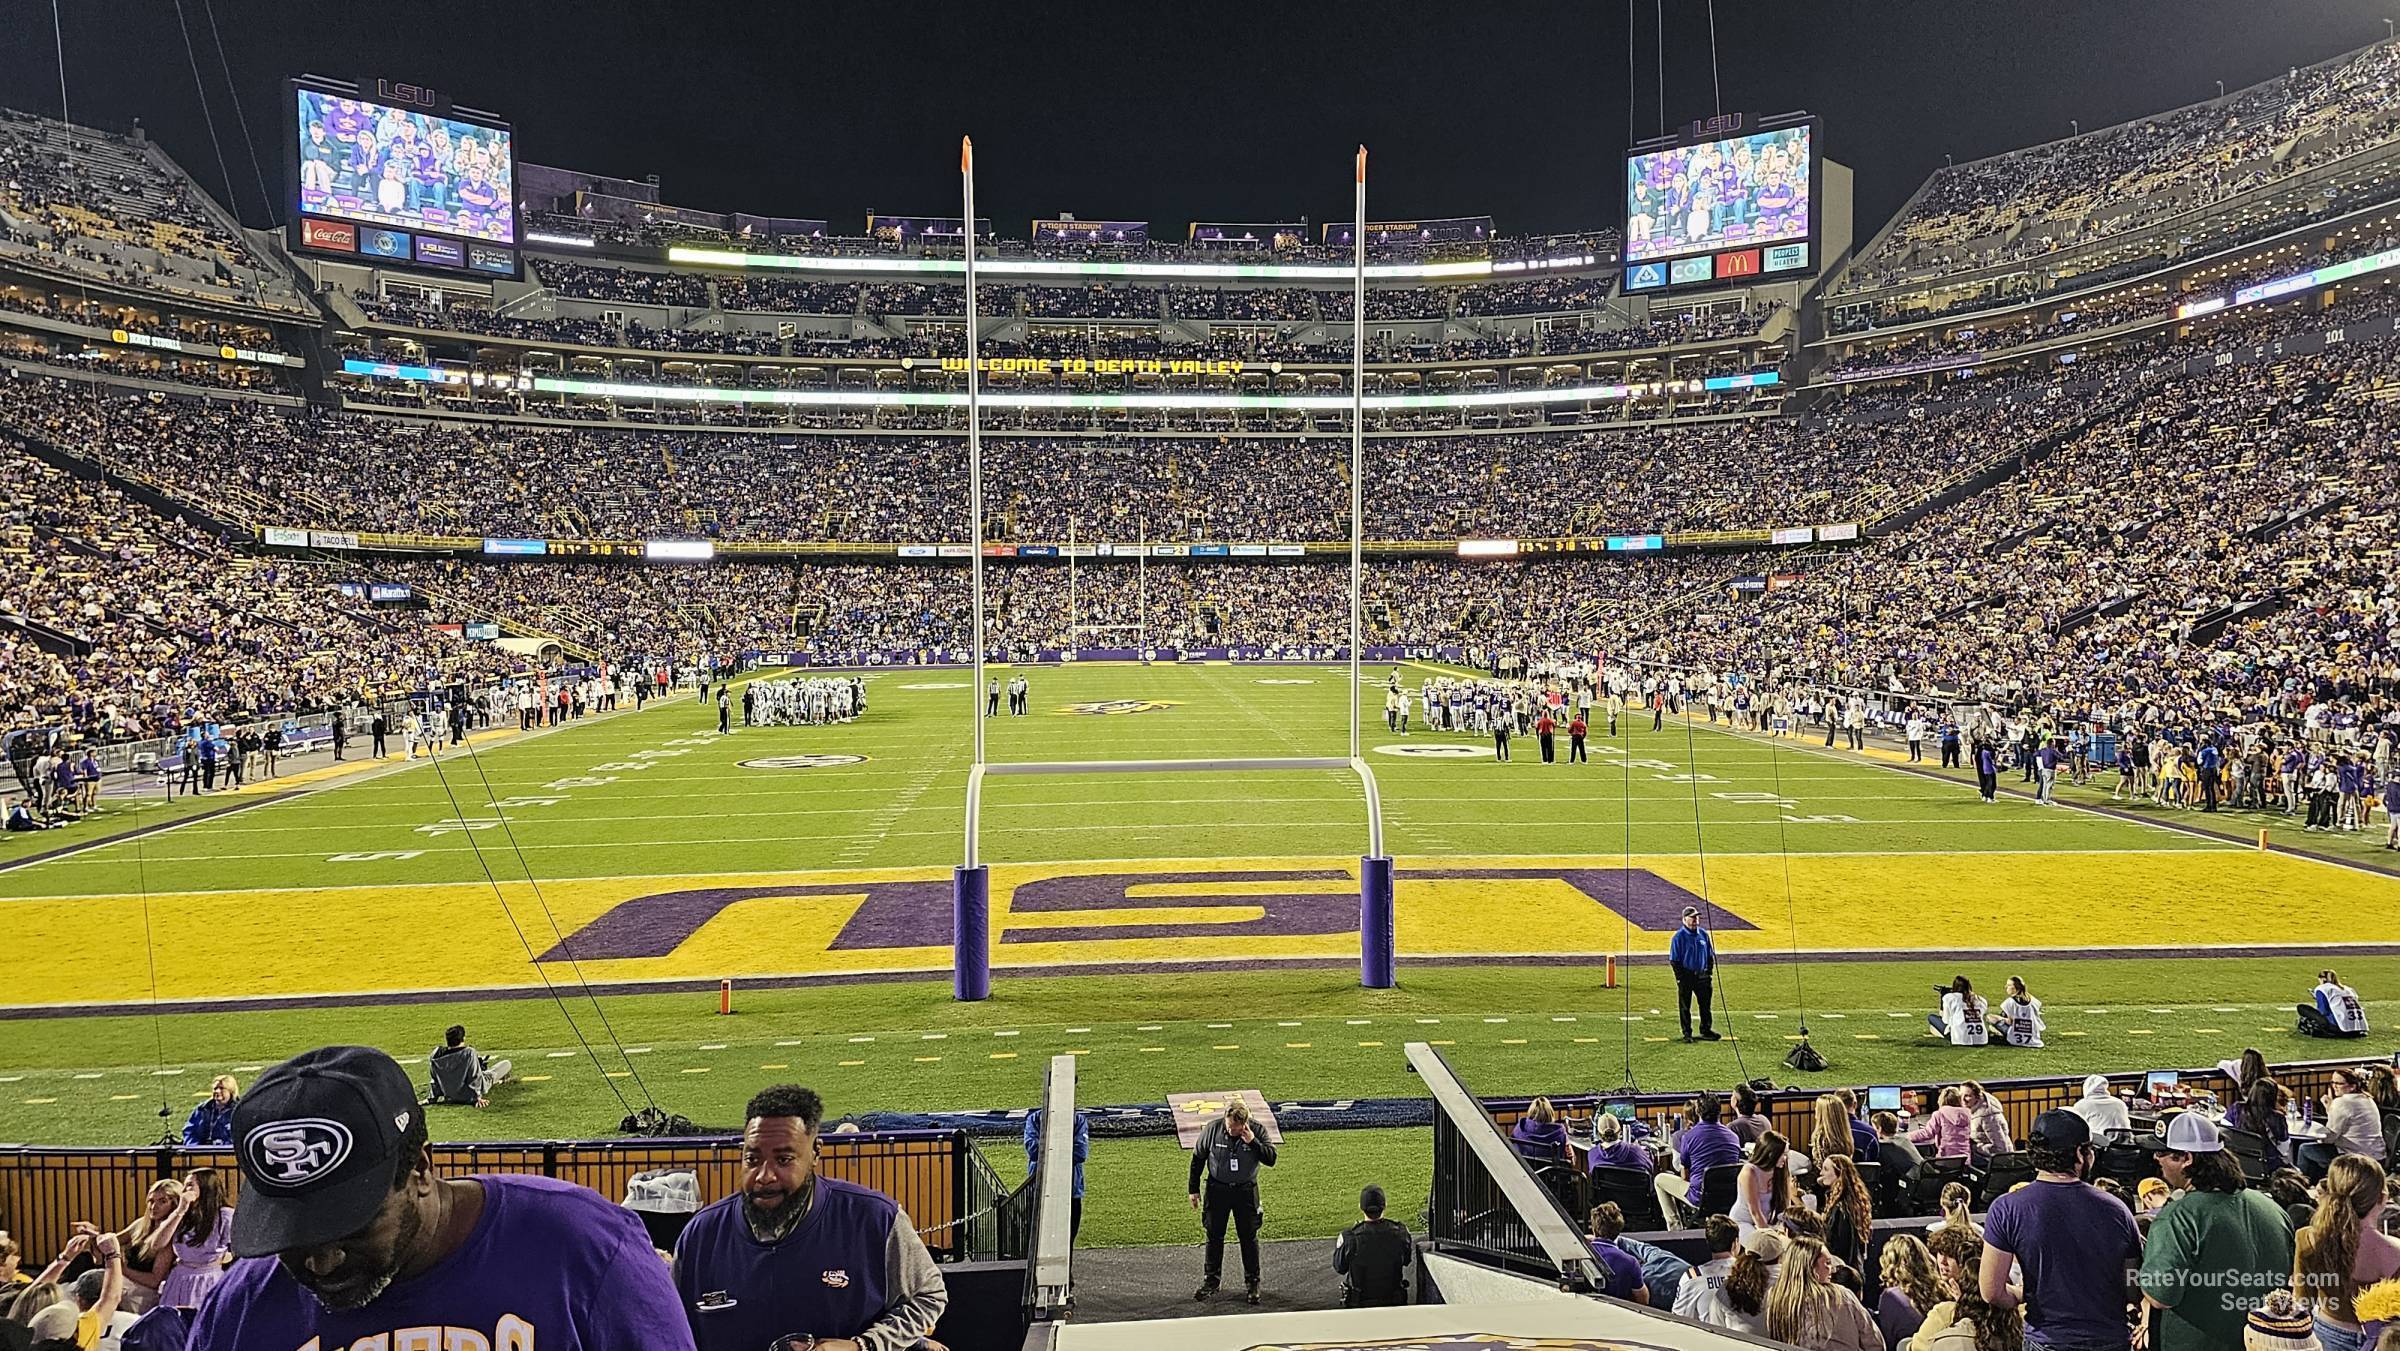 section 216, row 1 seat view  - tiger stadium